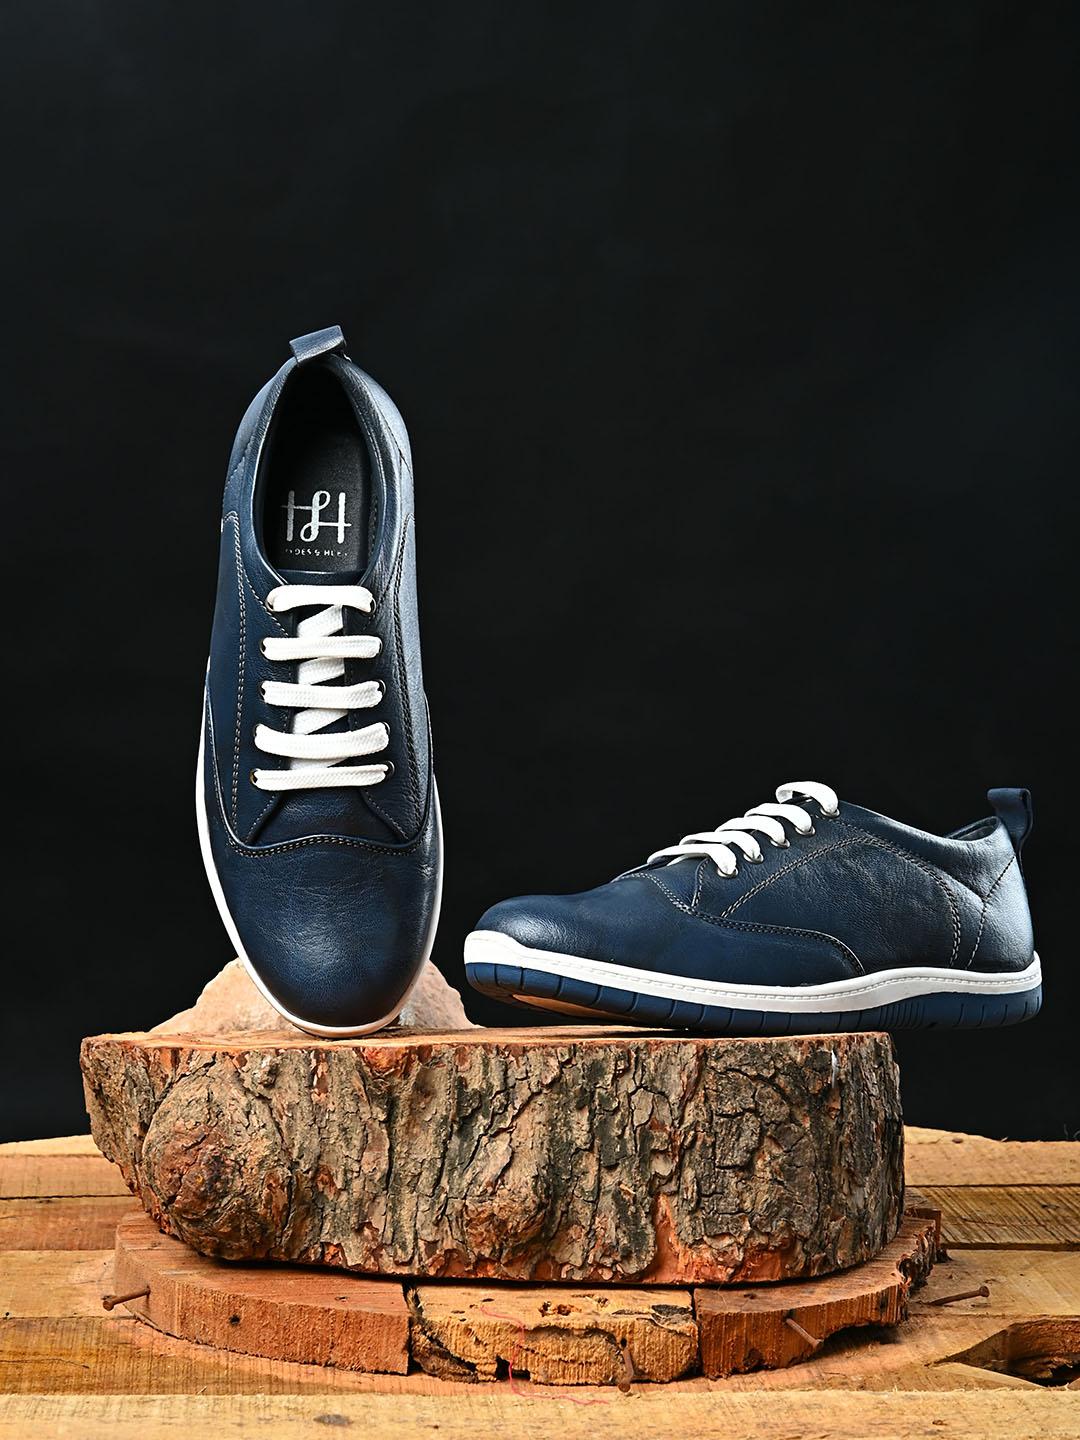 hydes n hues men blue leather sneakers